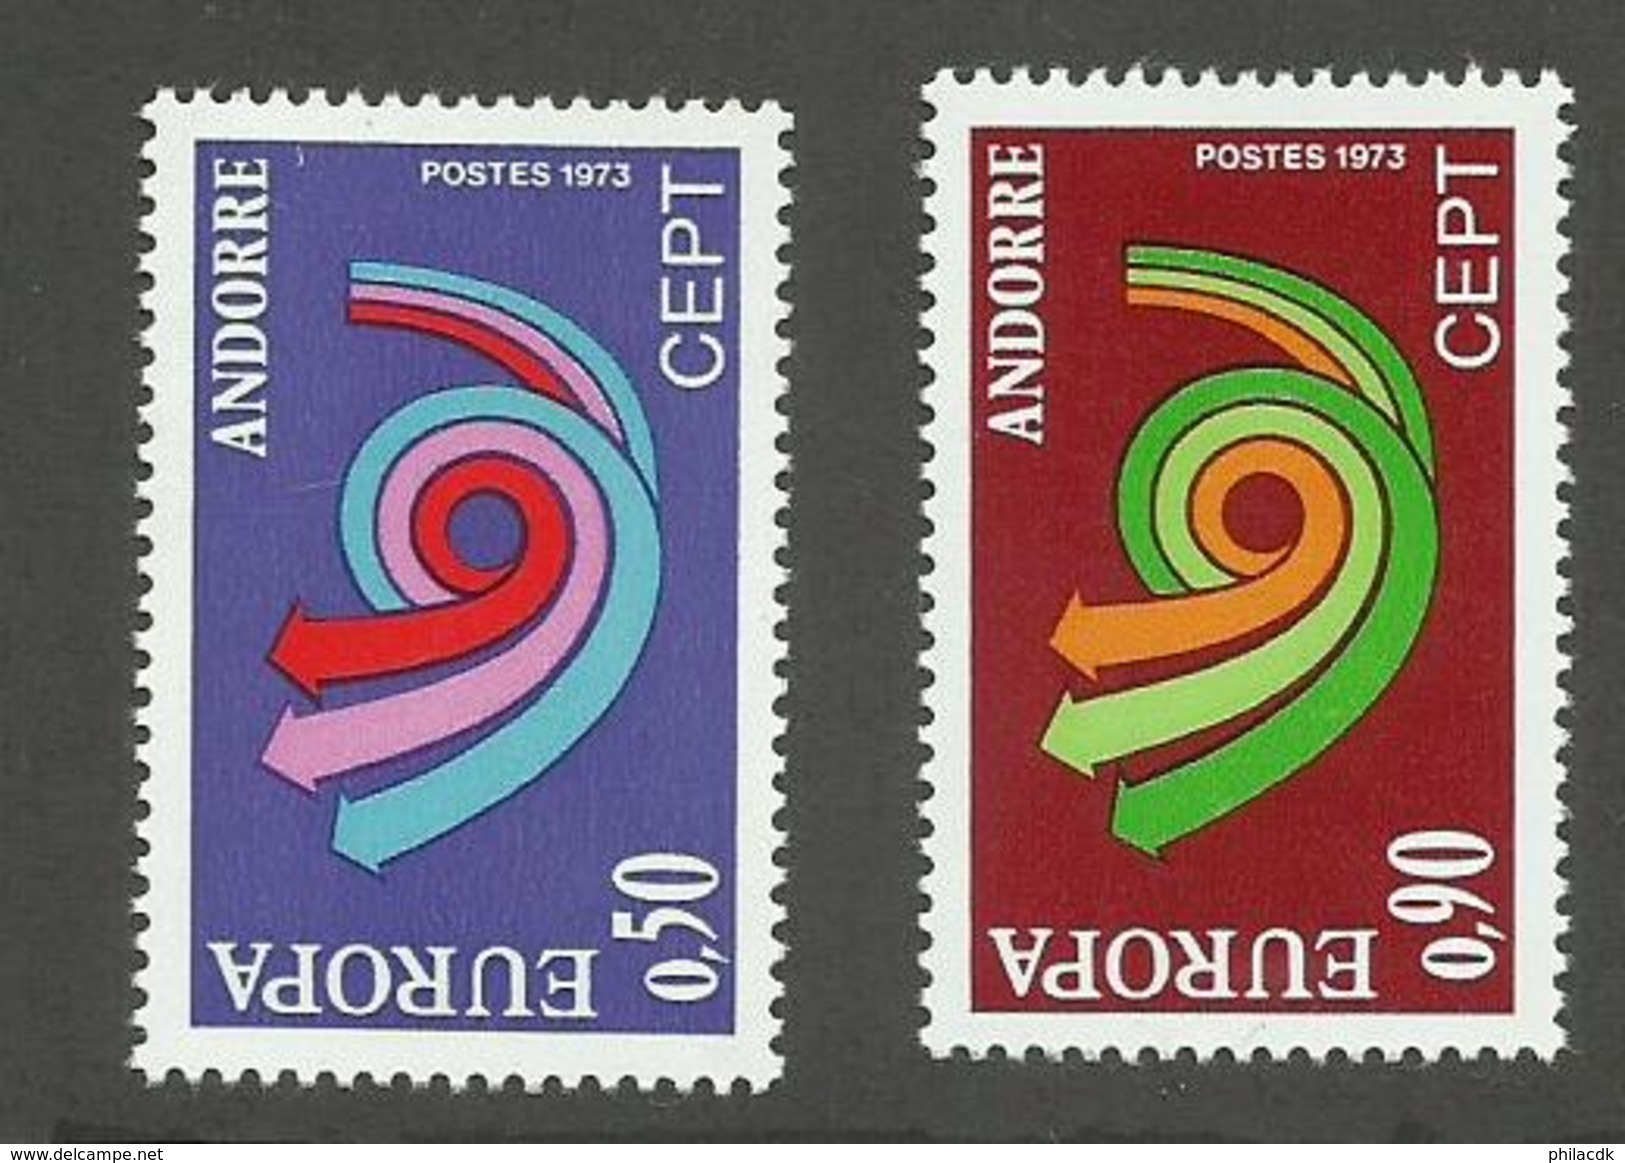 ANDORRE FRANCAIS - N°YT 226/27 NEUFS* AVEC CHARNIERE - COTE YT : 40&euro; - 1973 - Unused Stamps